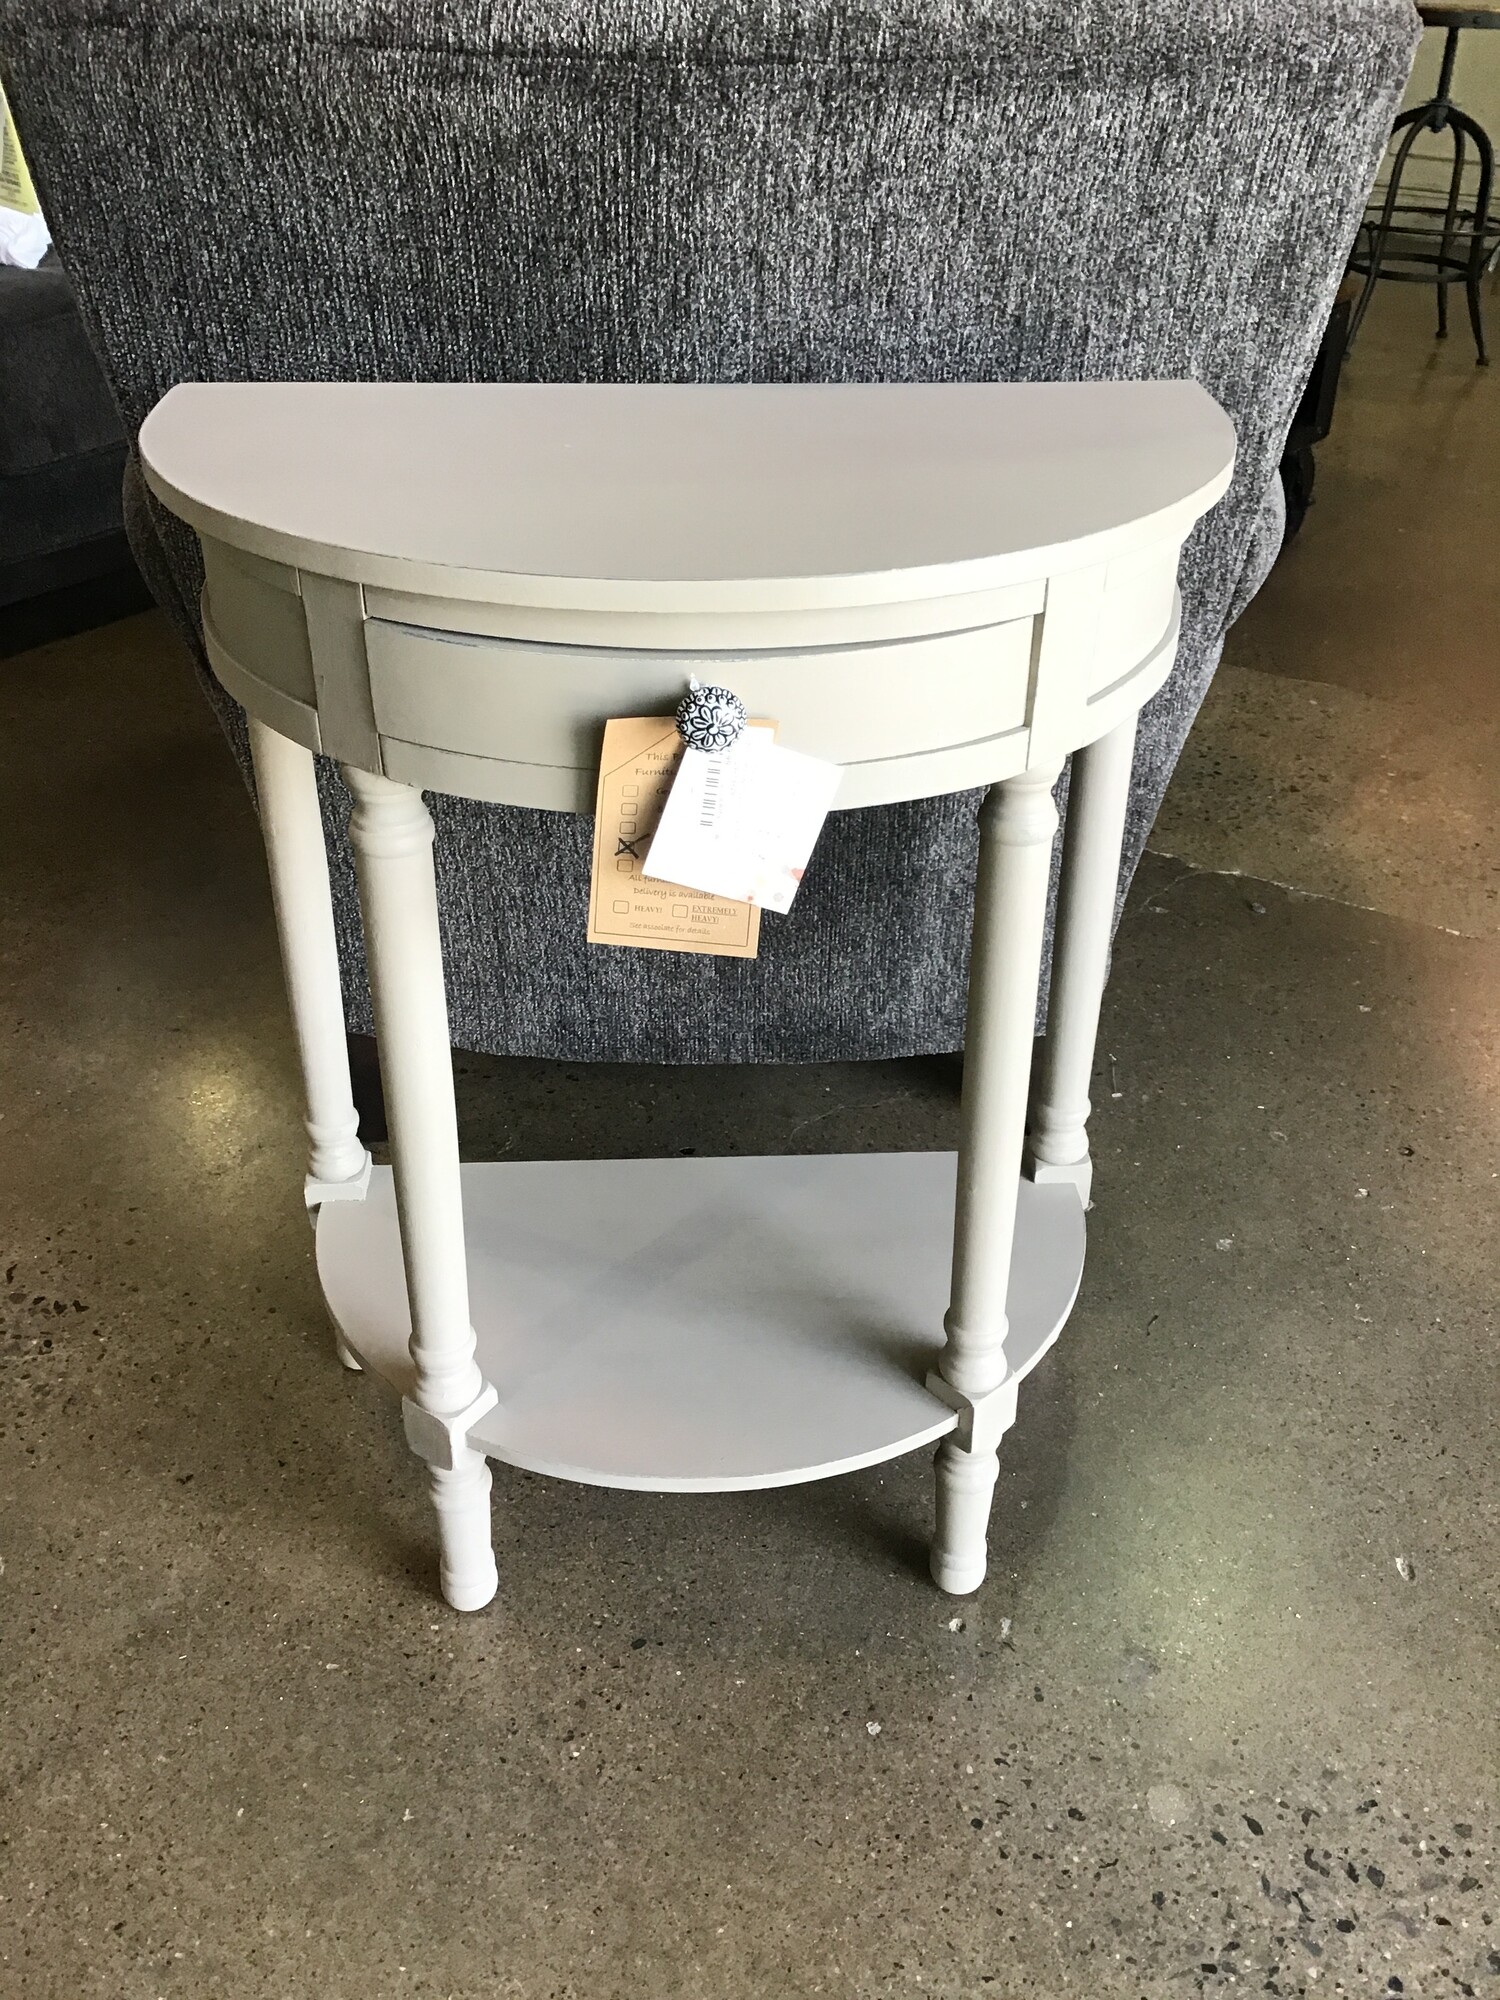 This beautifully updated demilune table was painted by one of our local artists using Country Chic Driftwood paint and clear wax. It features a small drawer, funky knob and lower shelf.
Dimensions are 24 in x 14 in x 29 in